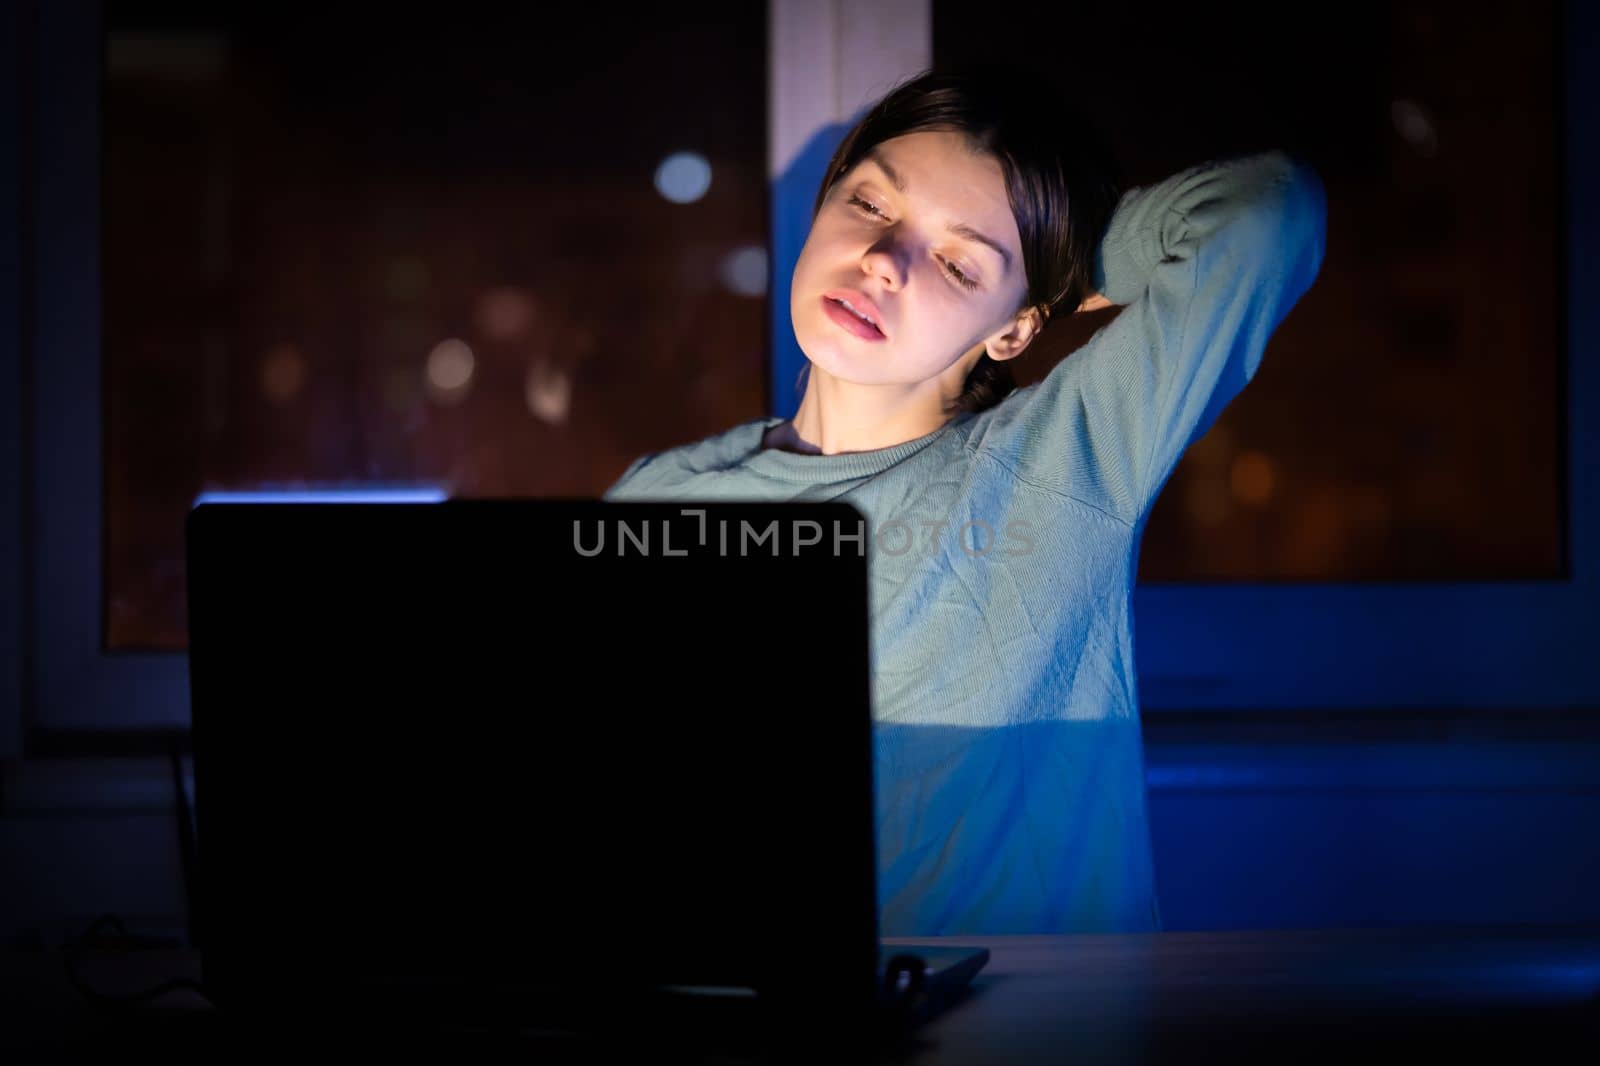 A young girl works while sitting at a laptop at night at home online, a woman is looking for information, texting, chatting using device via internet.